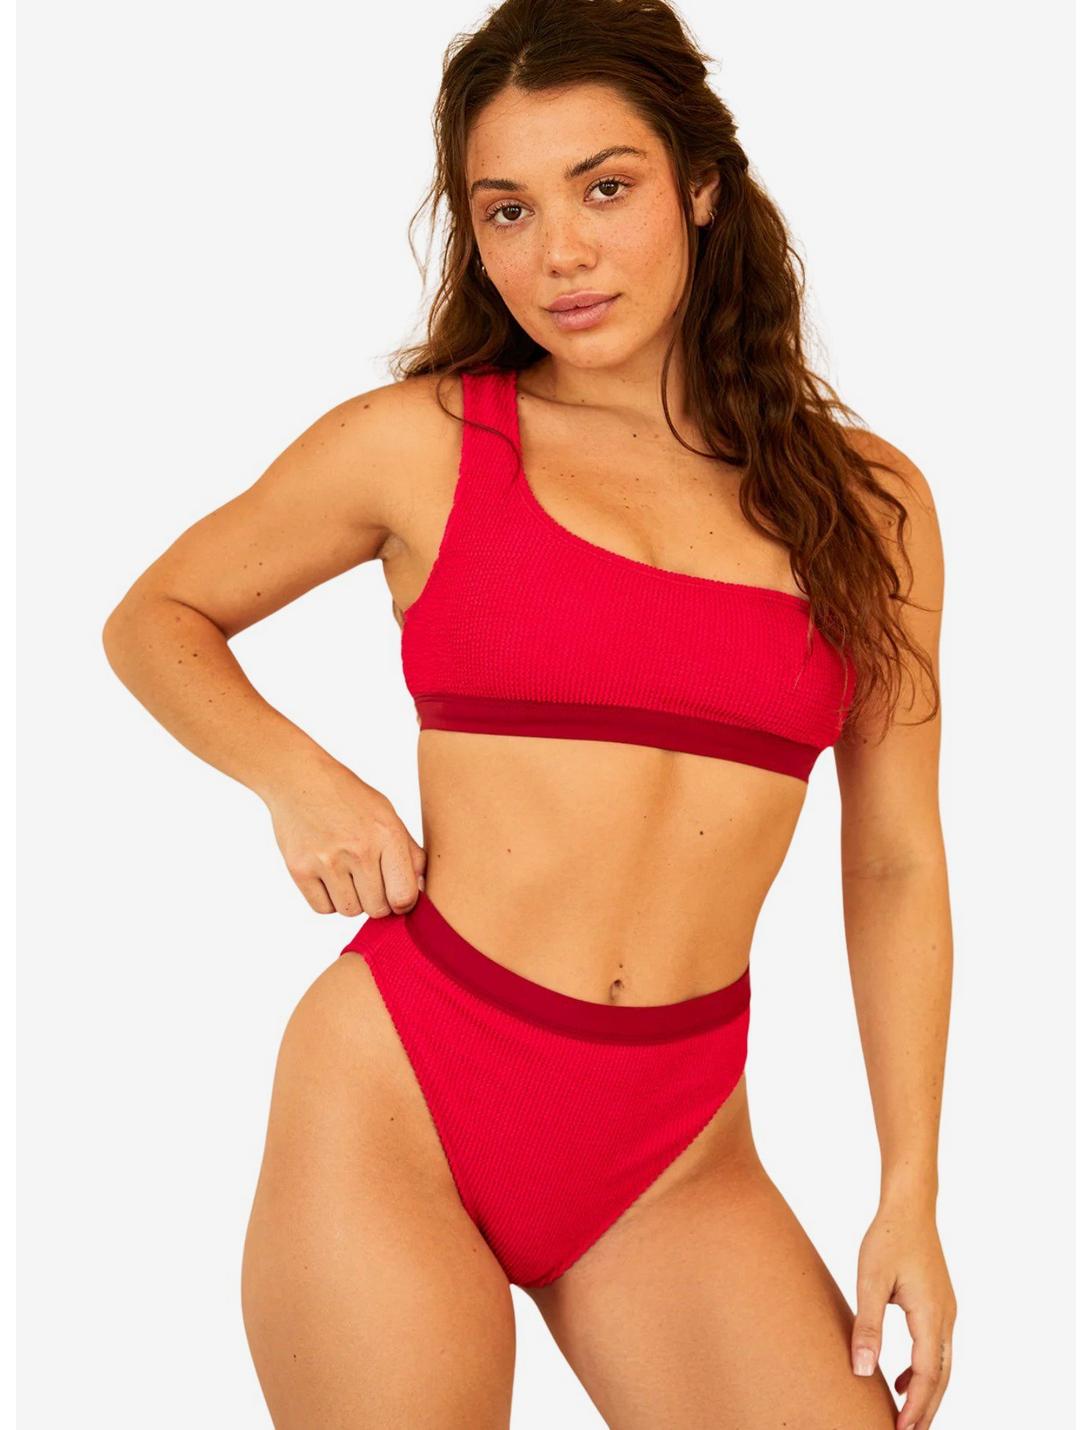 Dippin' Daisy's Ultra Swim Bottom Sunset Glow Red, RED, hi-res